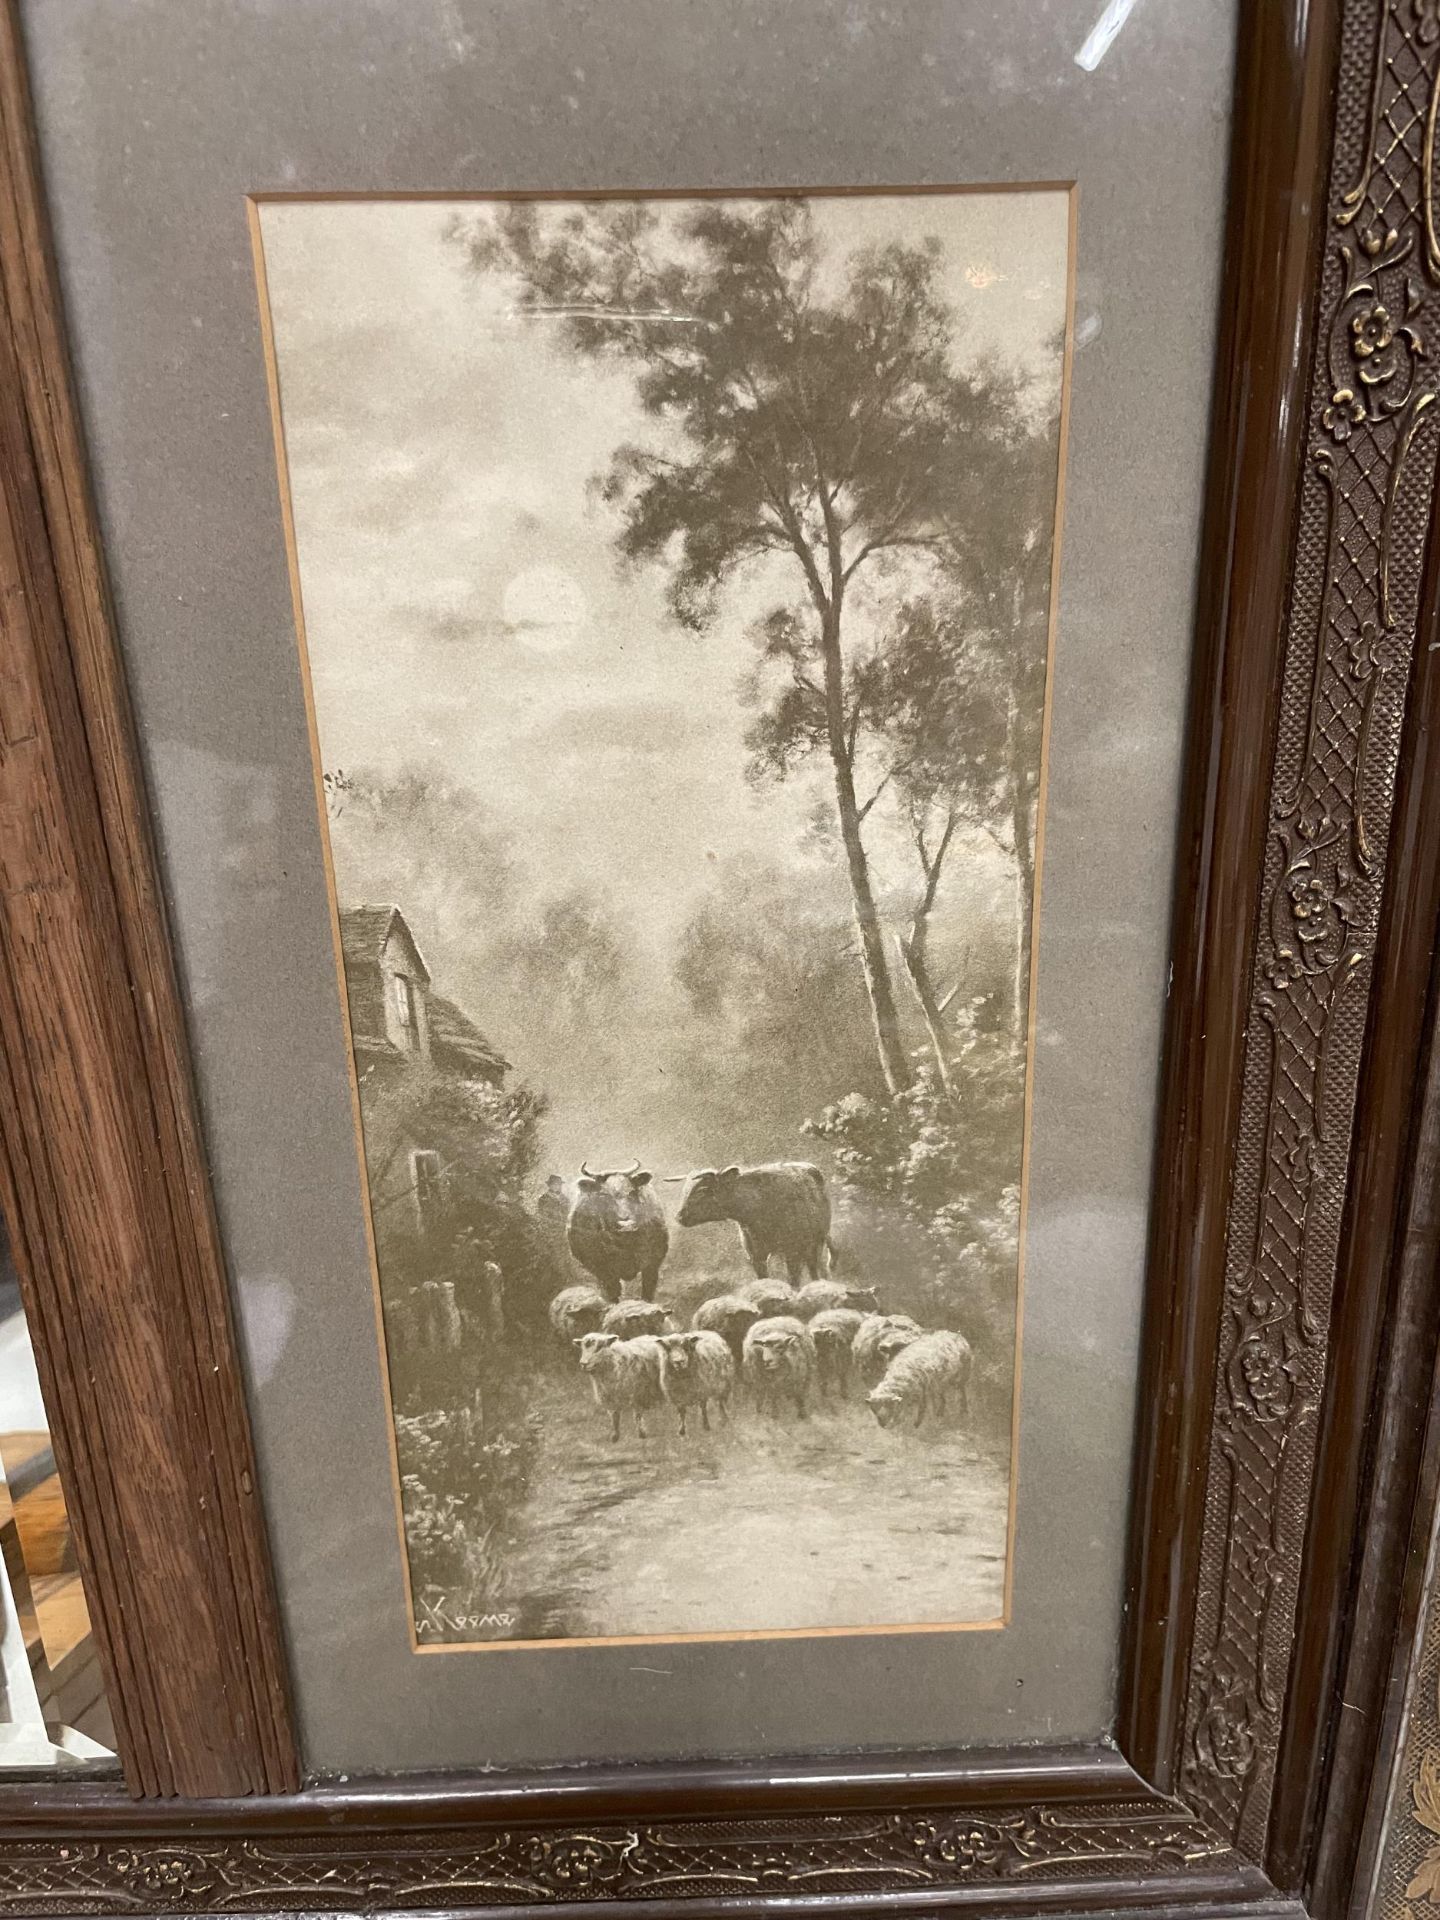 A VINTAGE CARVED WOODEN FRAMED MIRROR WITH SIDE PANELS OF CATTLE - Image 2 of 4